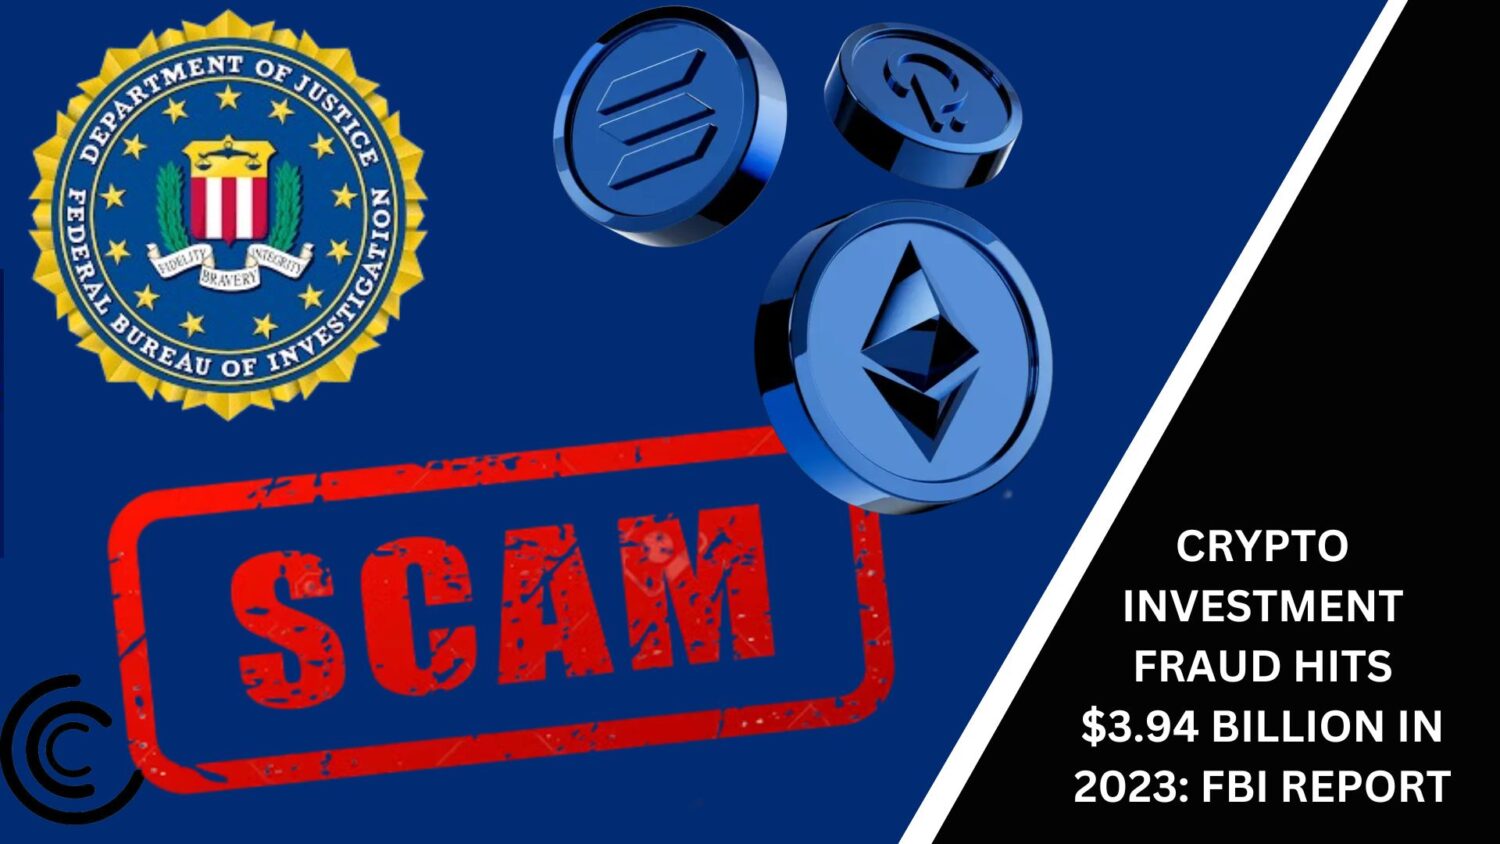 crypto-investment-fraud-hits-$3.94-billion-in-2023:-fbi-report-–-coincodecap